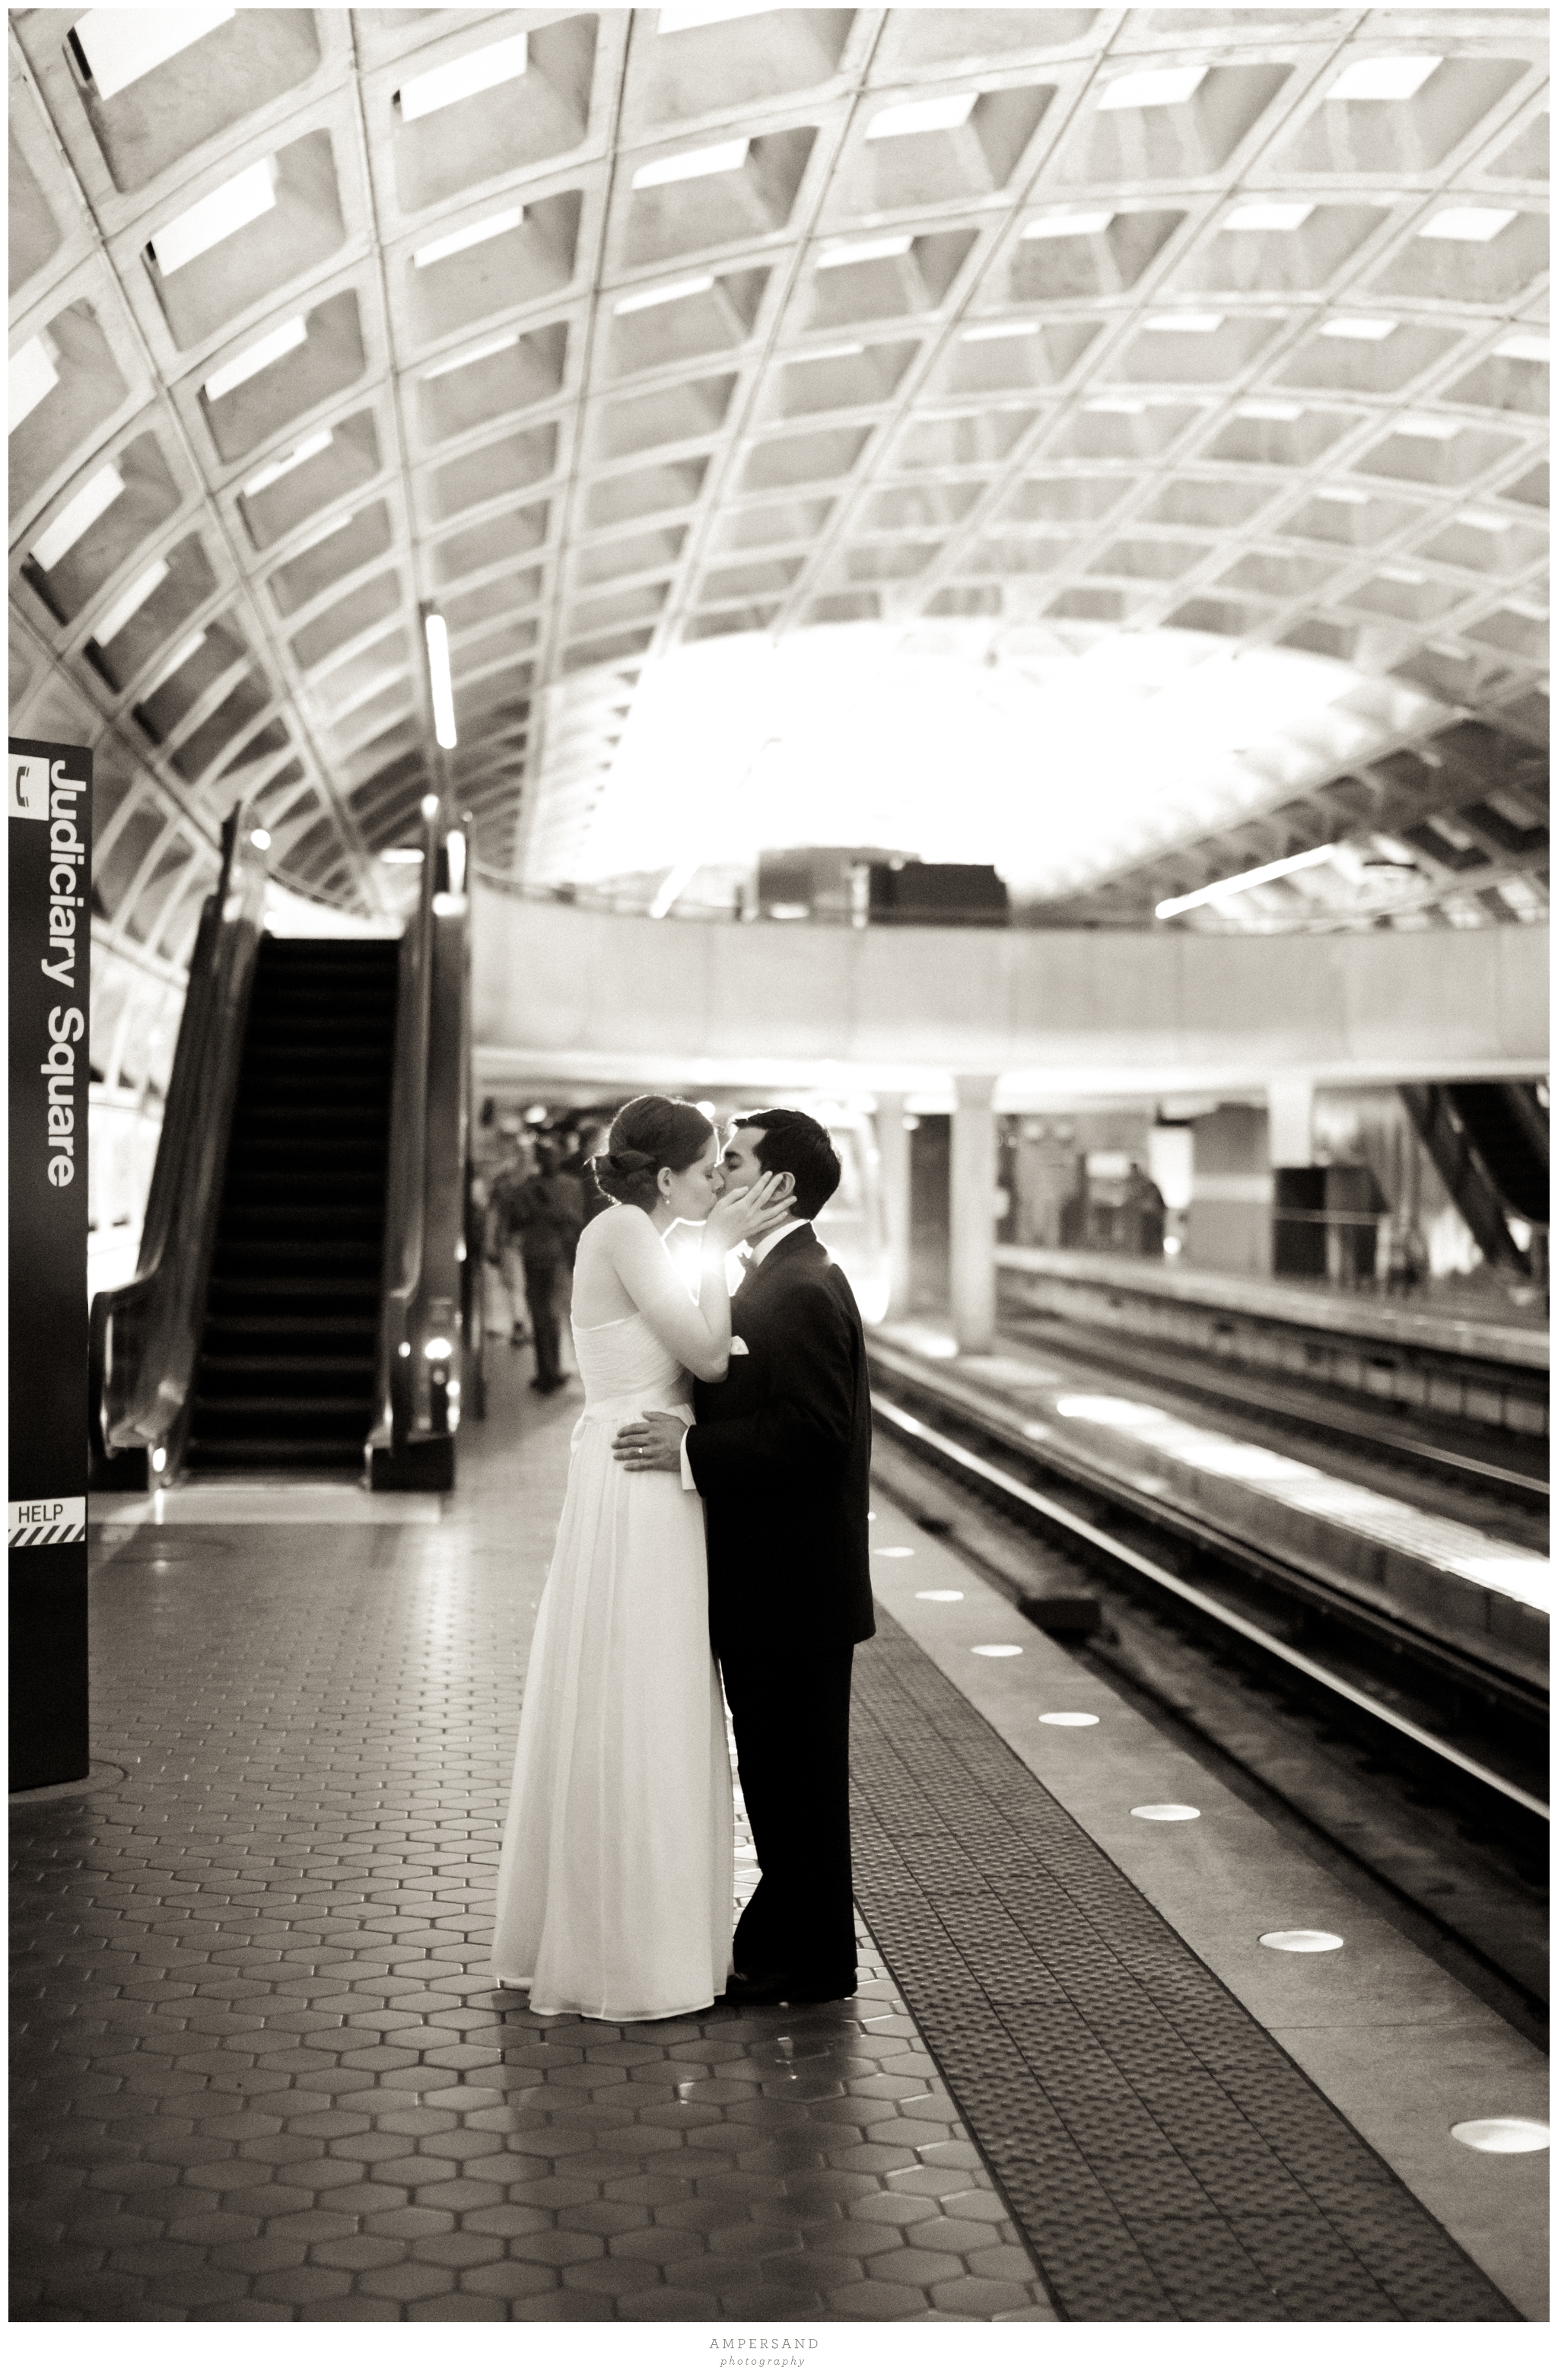 DC metro wedding portraits  // Photos by Ampersand Photography